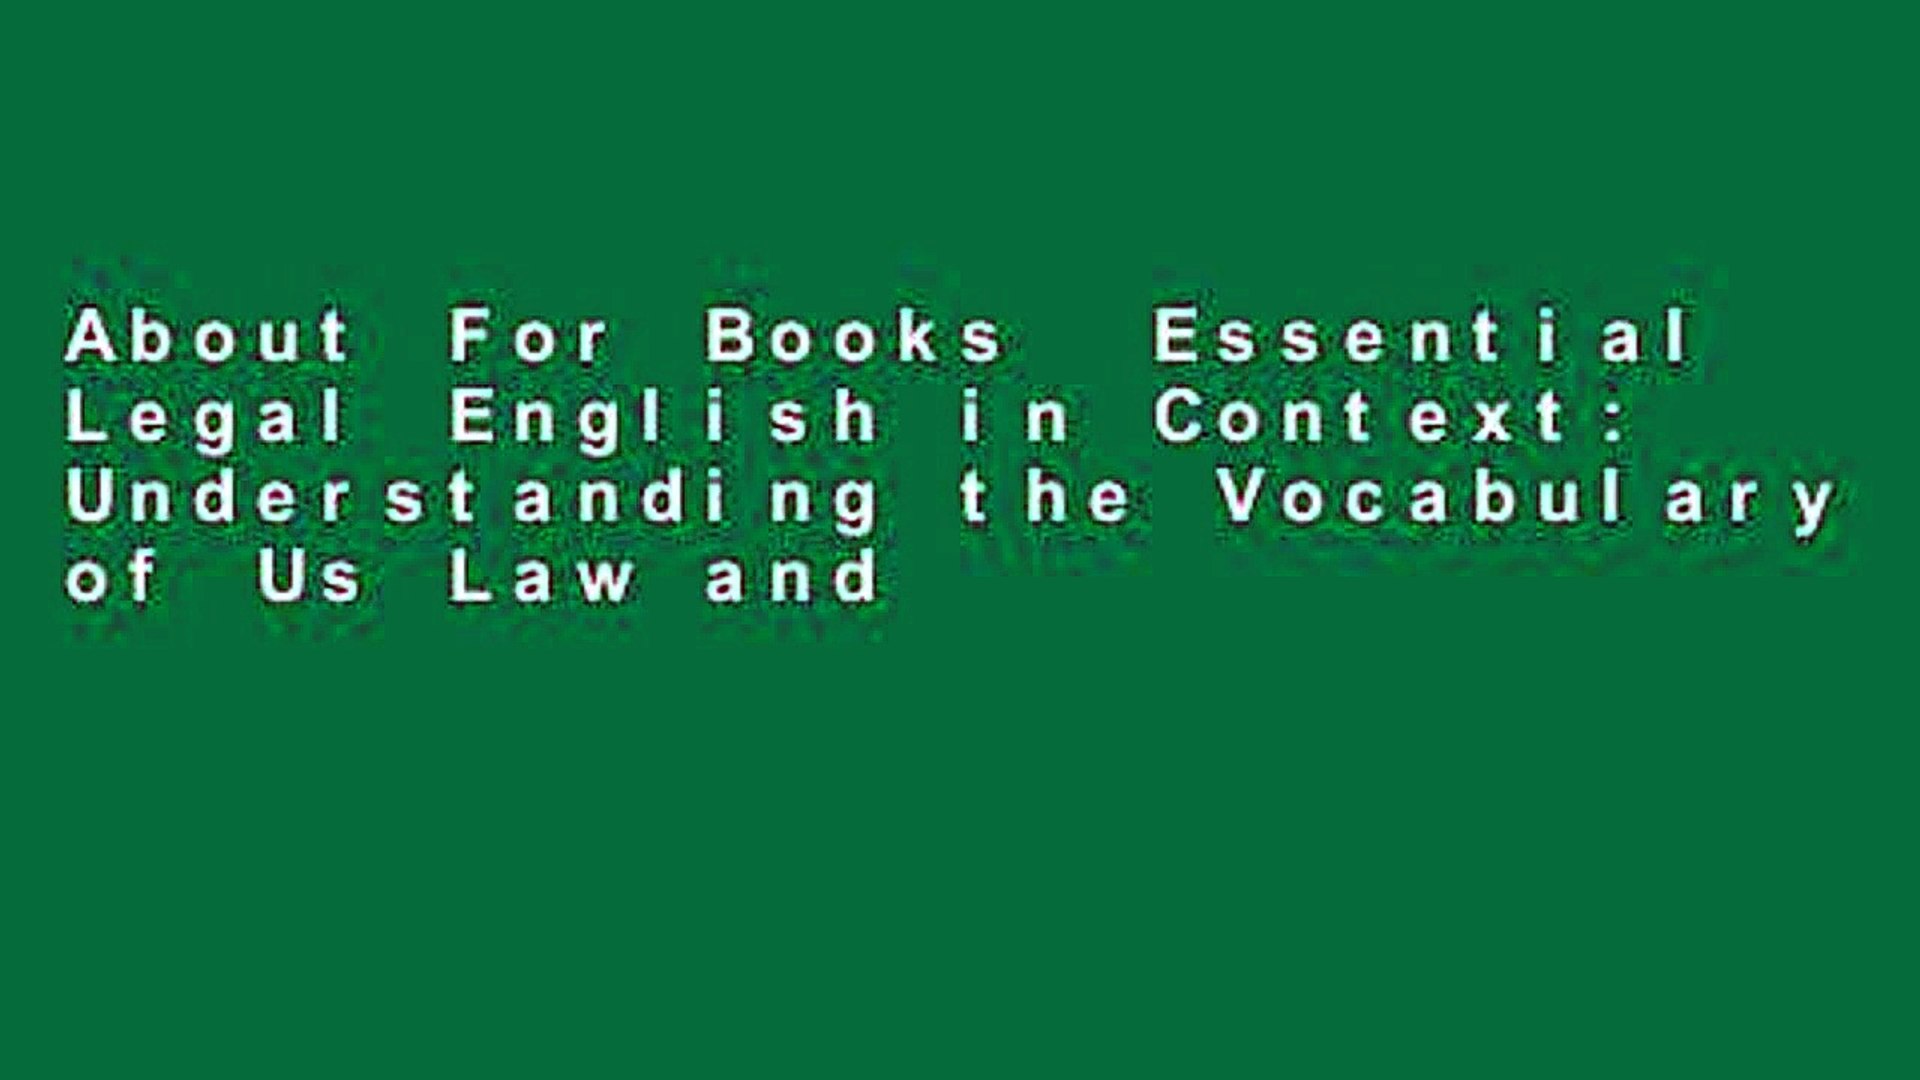 About For Books  Essential Legal English in Context: Understanding the Vocabulary of Us Law and